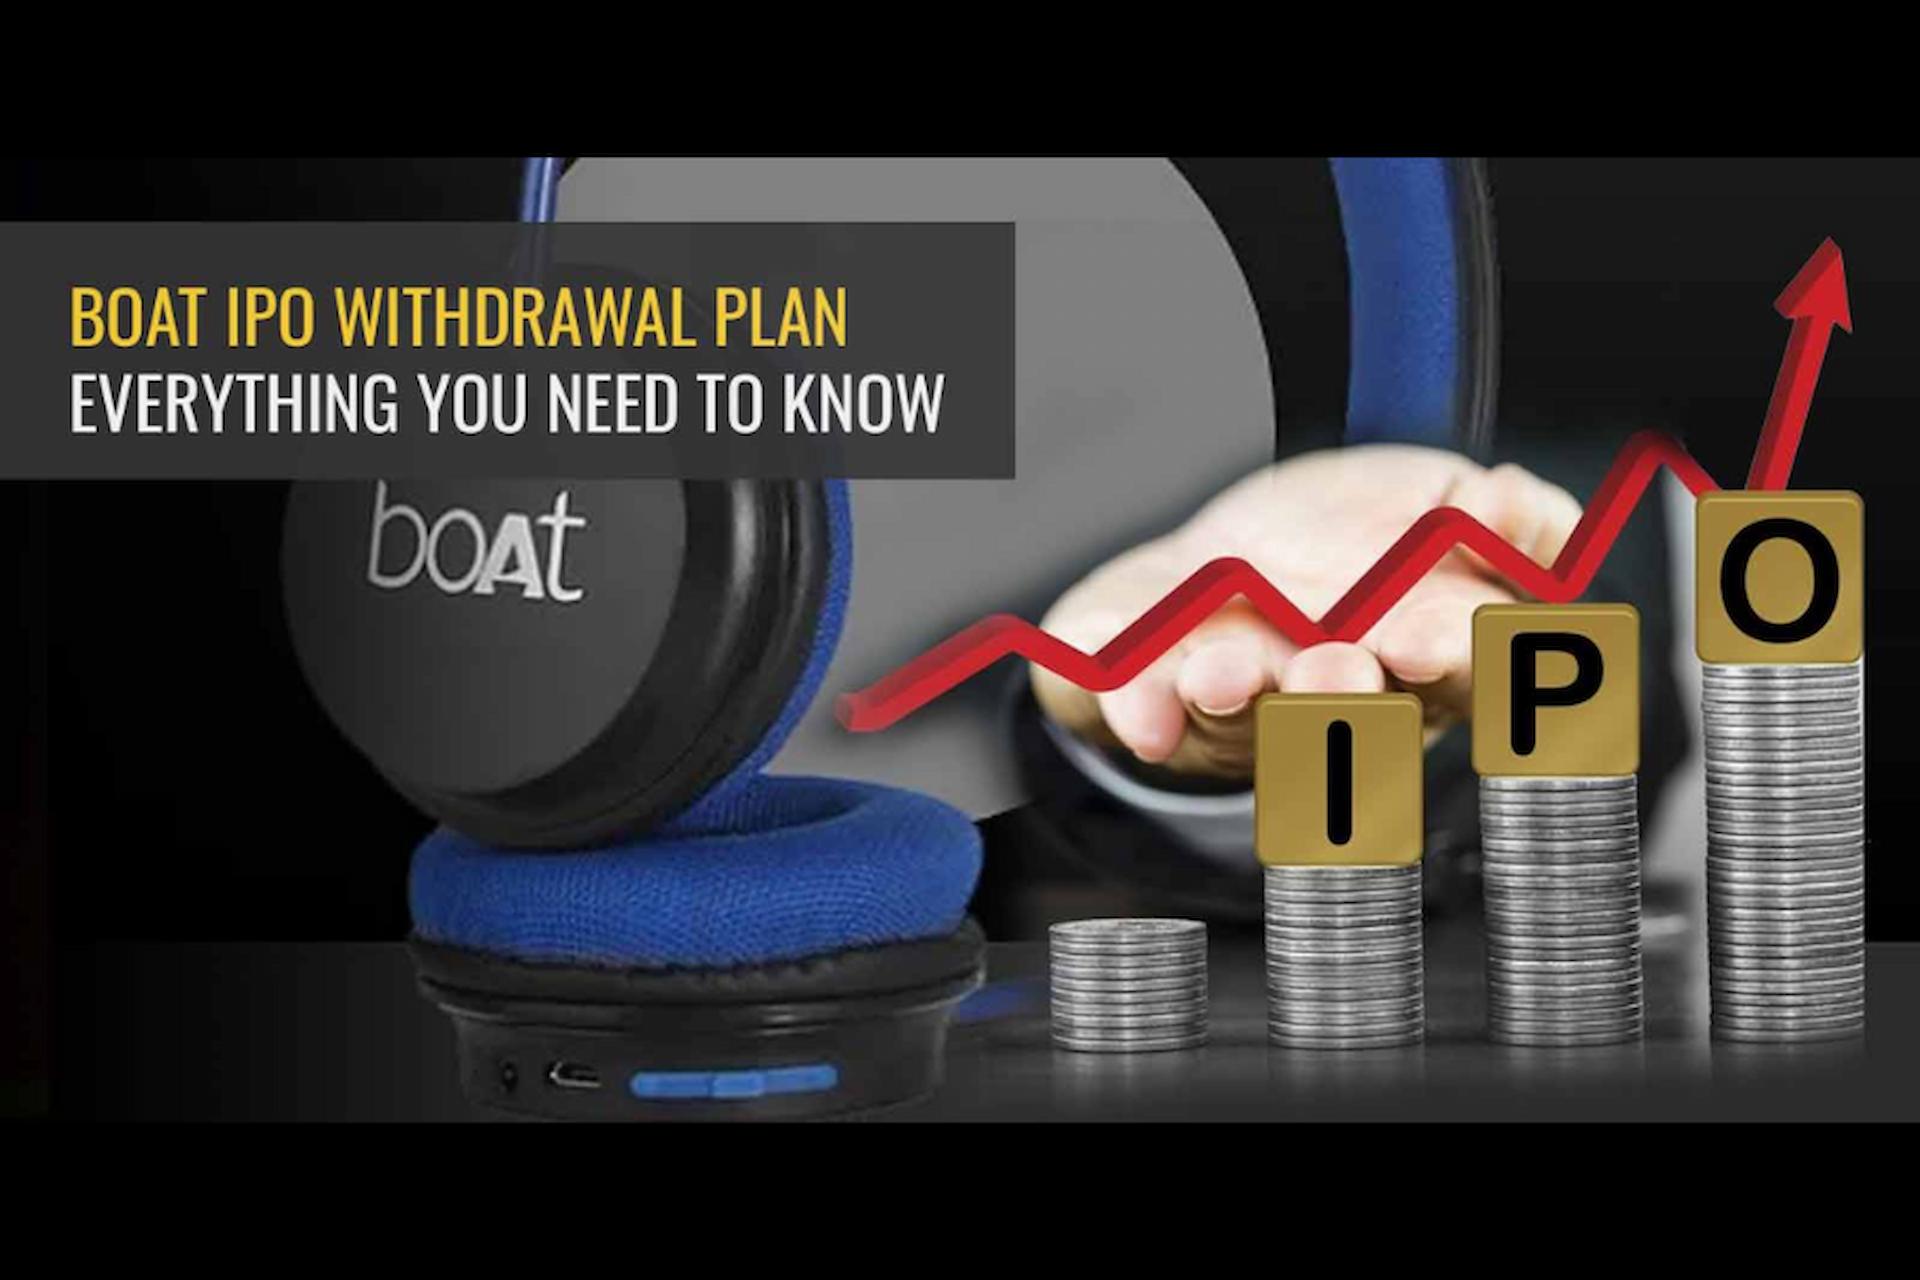 How Will Boat Withdrawal Of IPO Impact Its Unlisted Share Prices?